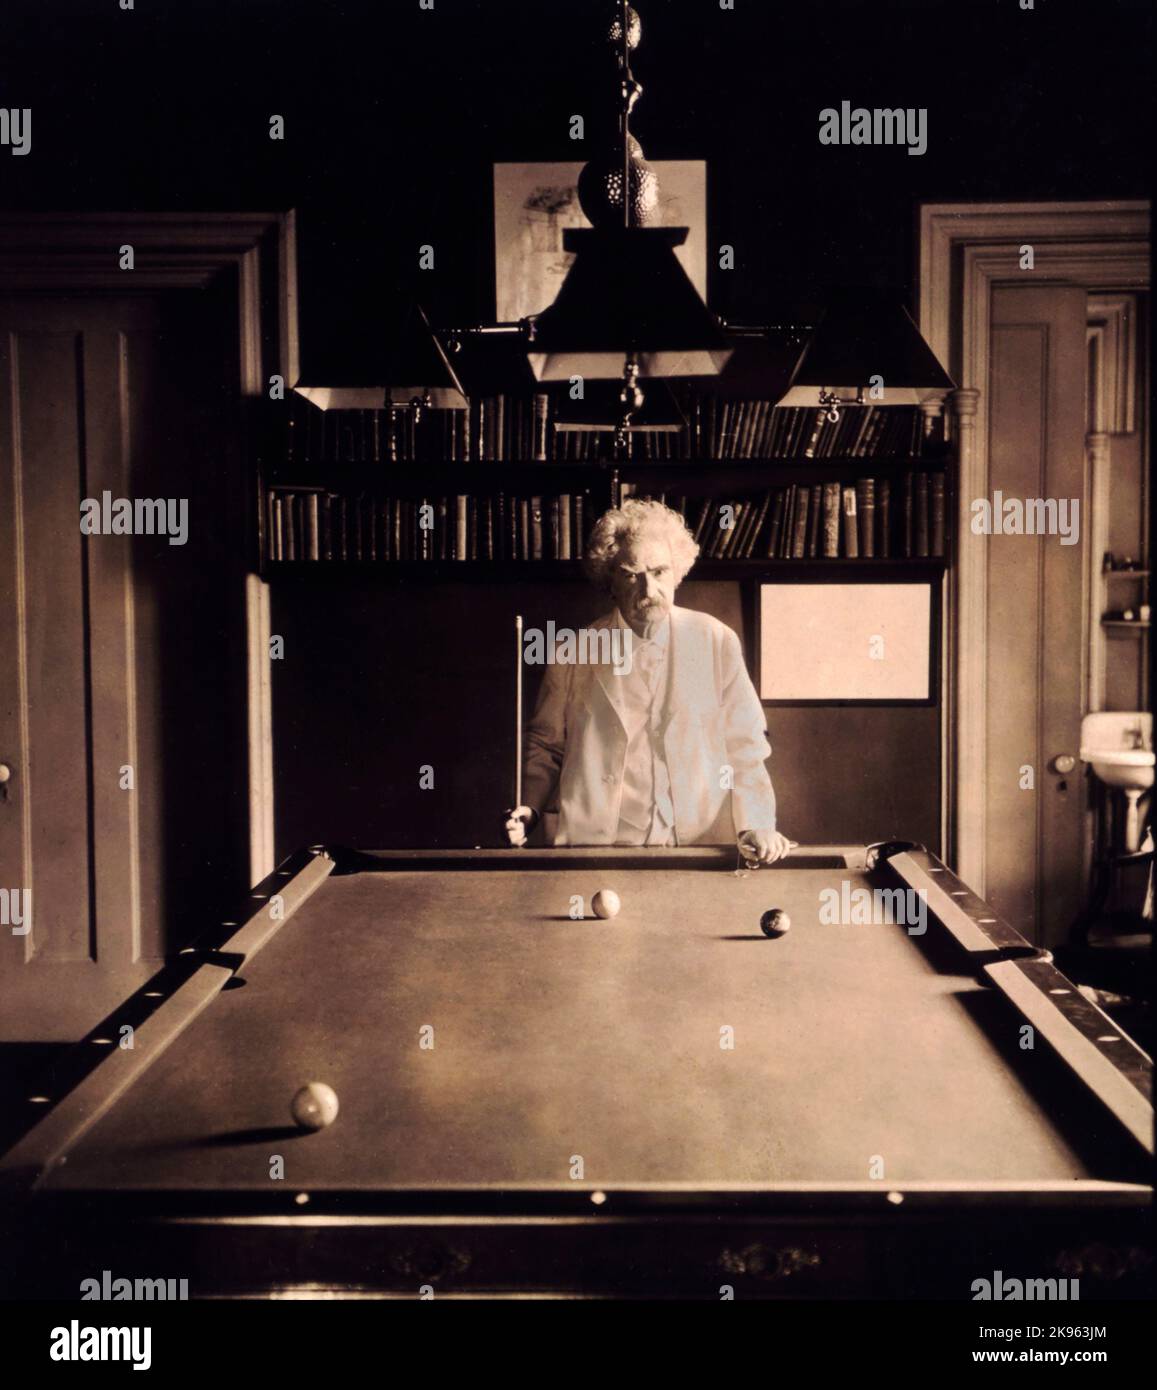 Mark Twain (Samuel L. Clemens) half-length portrait, standing at end of pool table Stock Photo